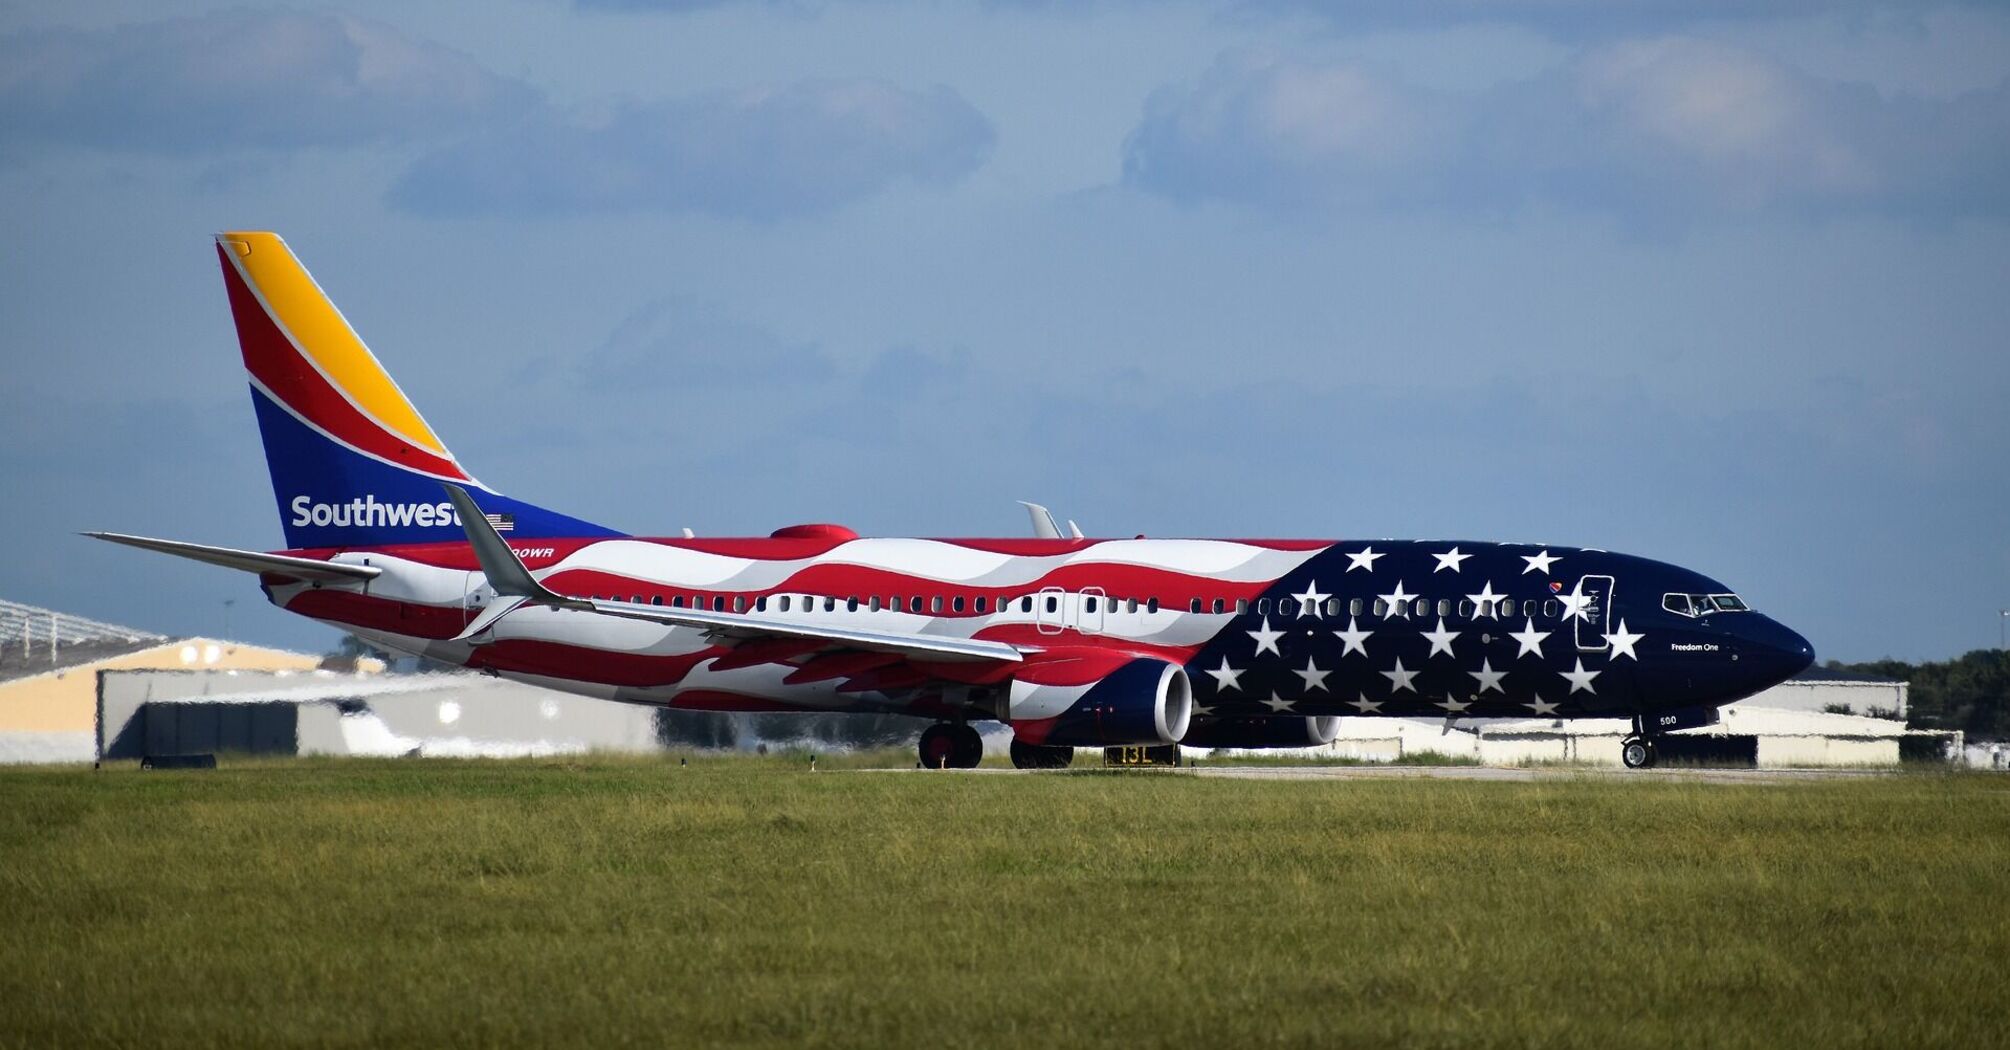 Southwest Airlines plane with a special livery featuring the American flag on its fuselage on the tarmac